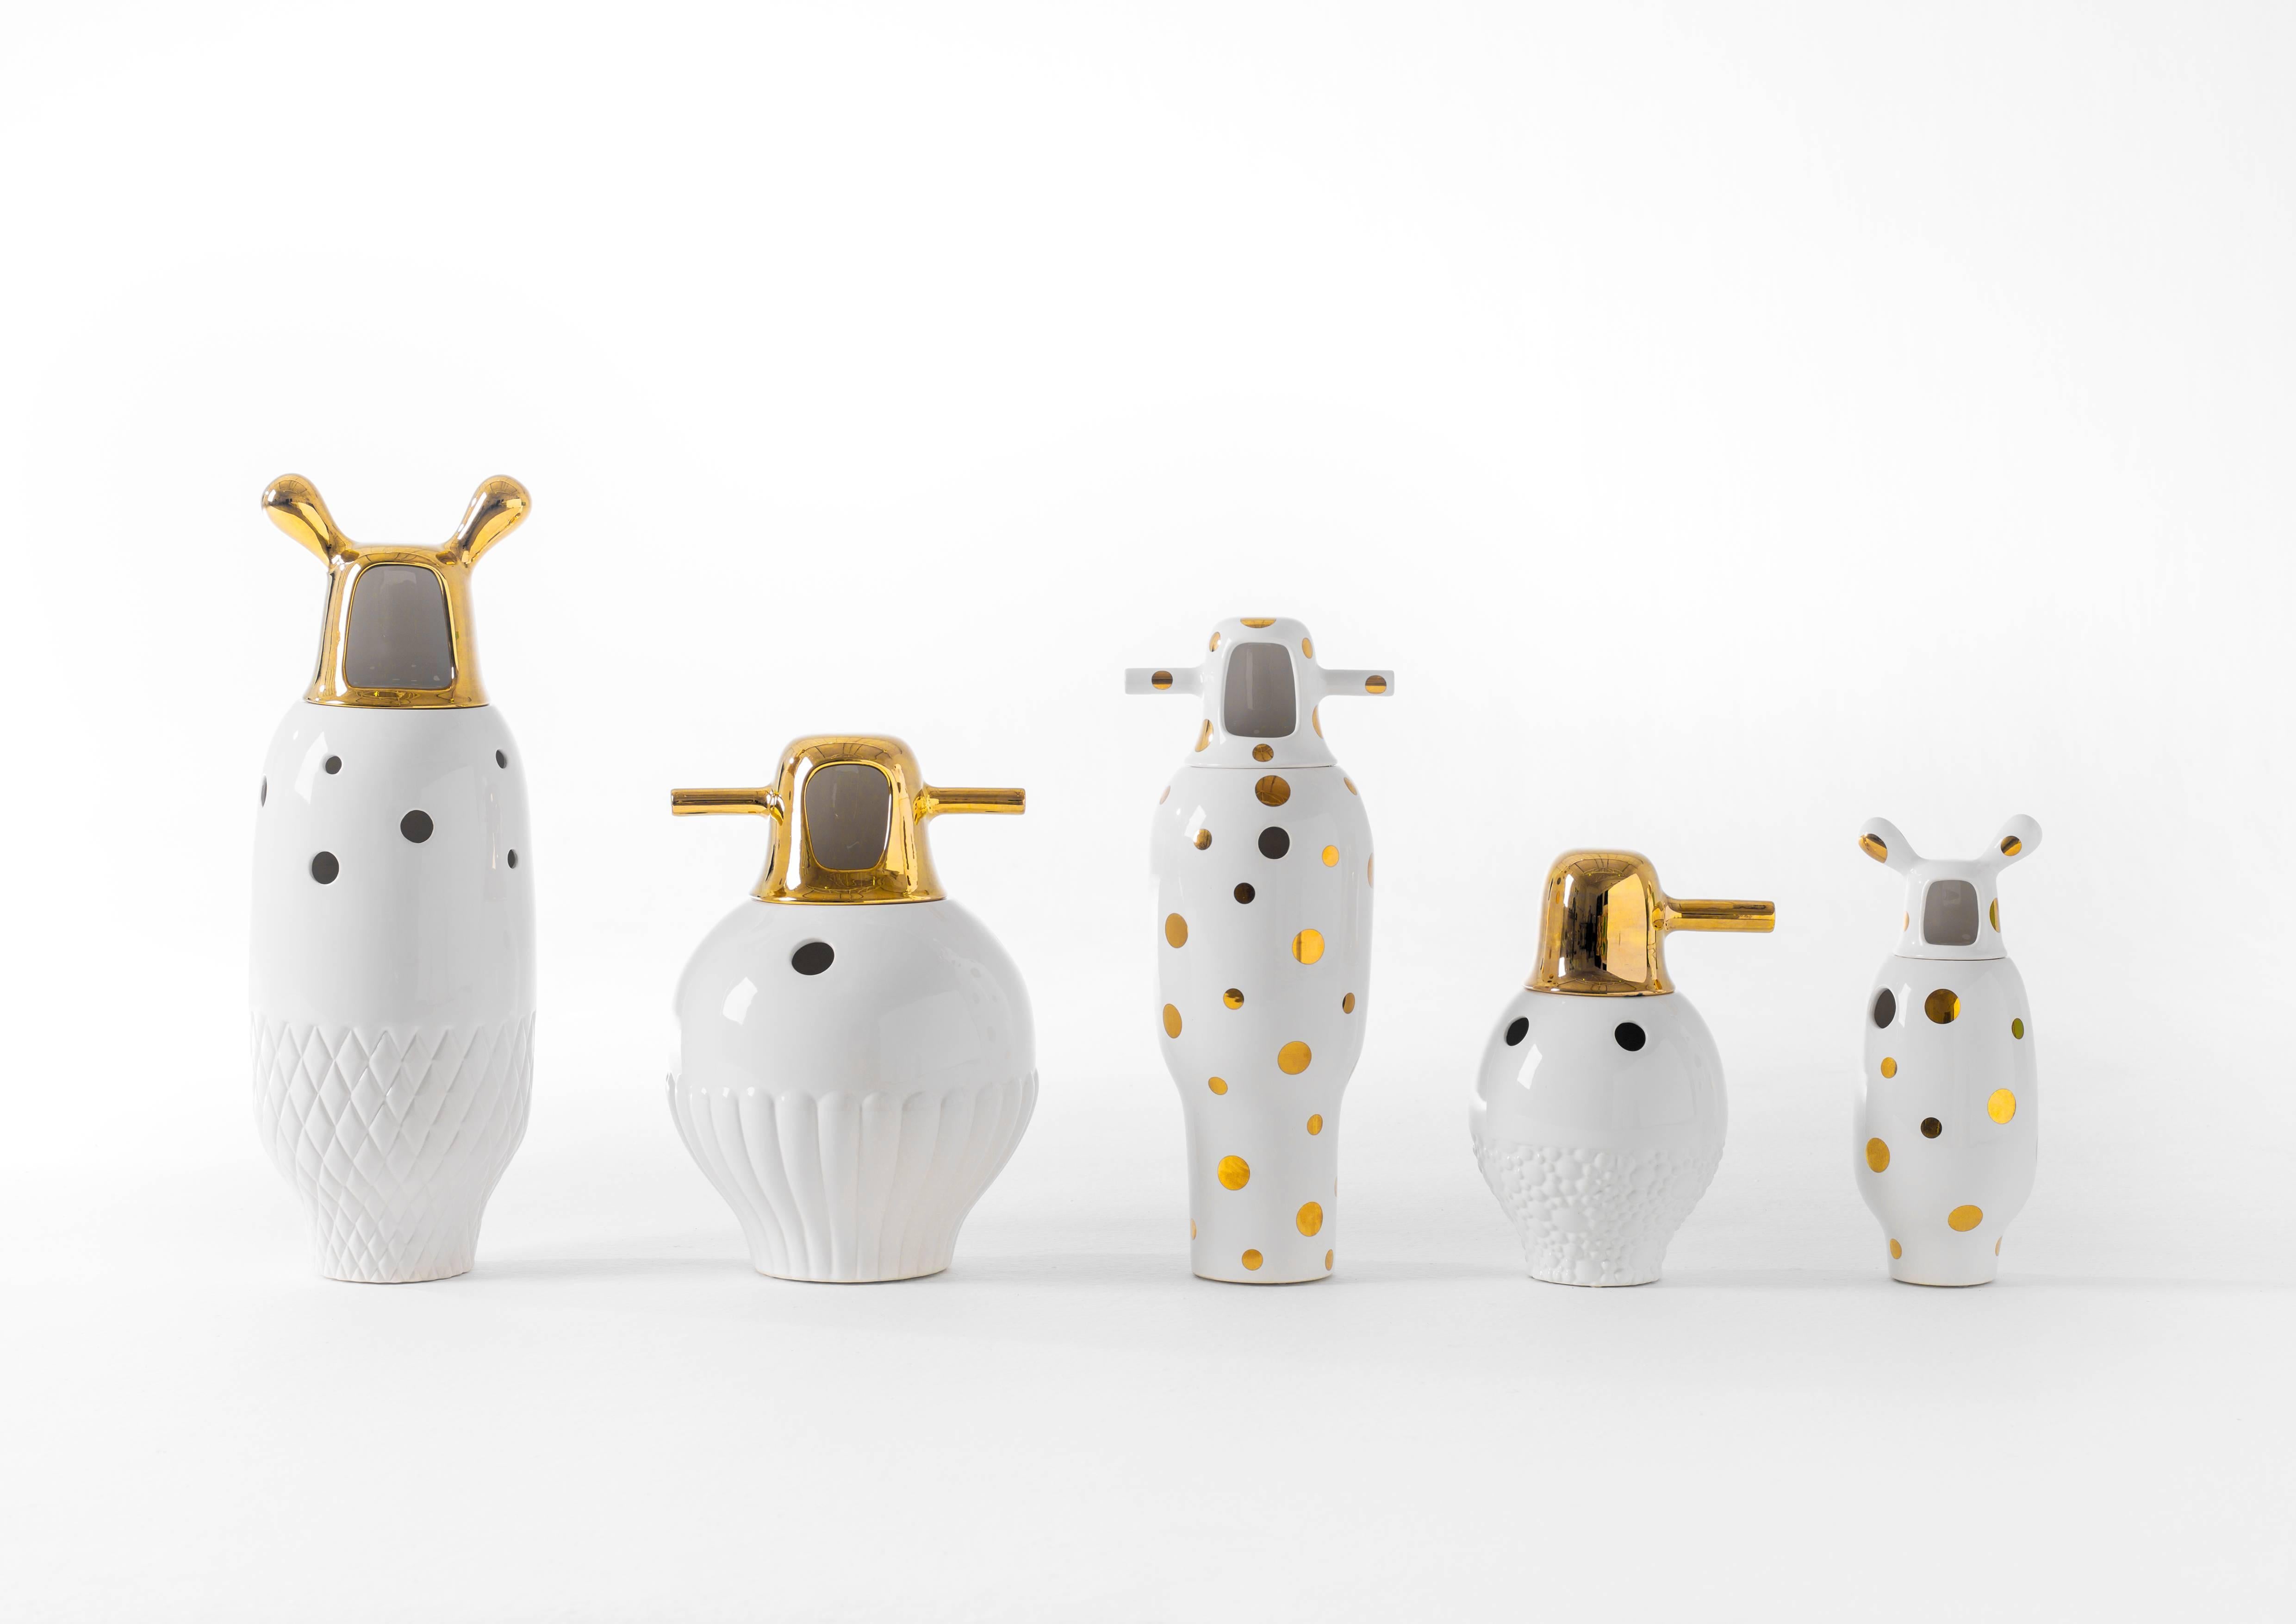 Contemporary showtime 10 vase number 3 by Jaime Hayon.
Manufactured by BD Barcelona (Spain).

Made up of two pieces in glazed stoneware, with a white finish and 24-carat gold-plated decorations.

Measures: Height 42 cm x diameter 27 cm.